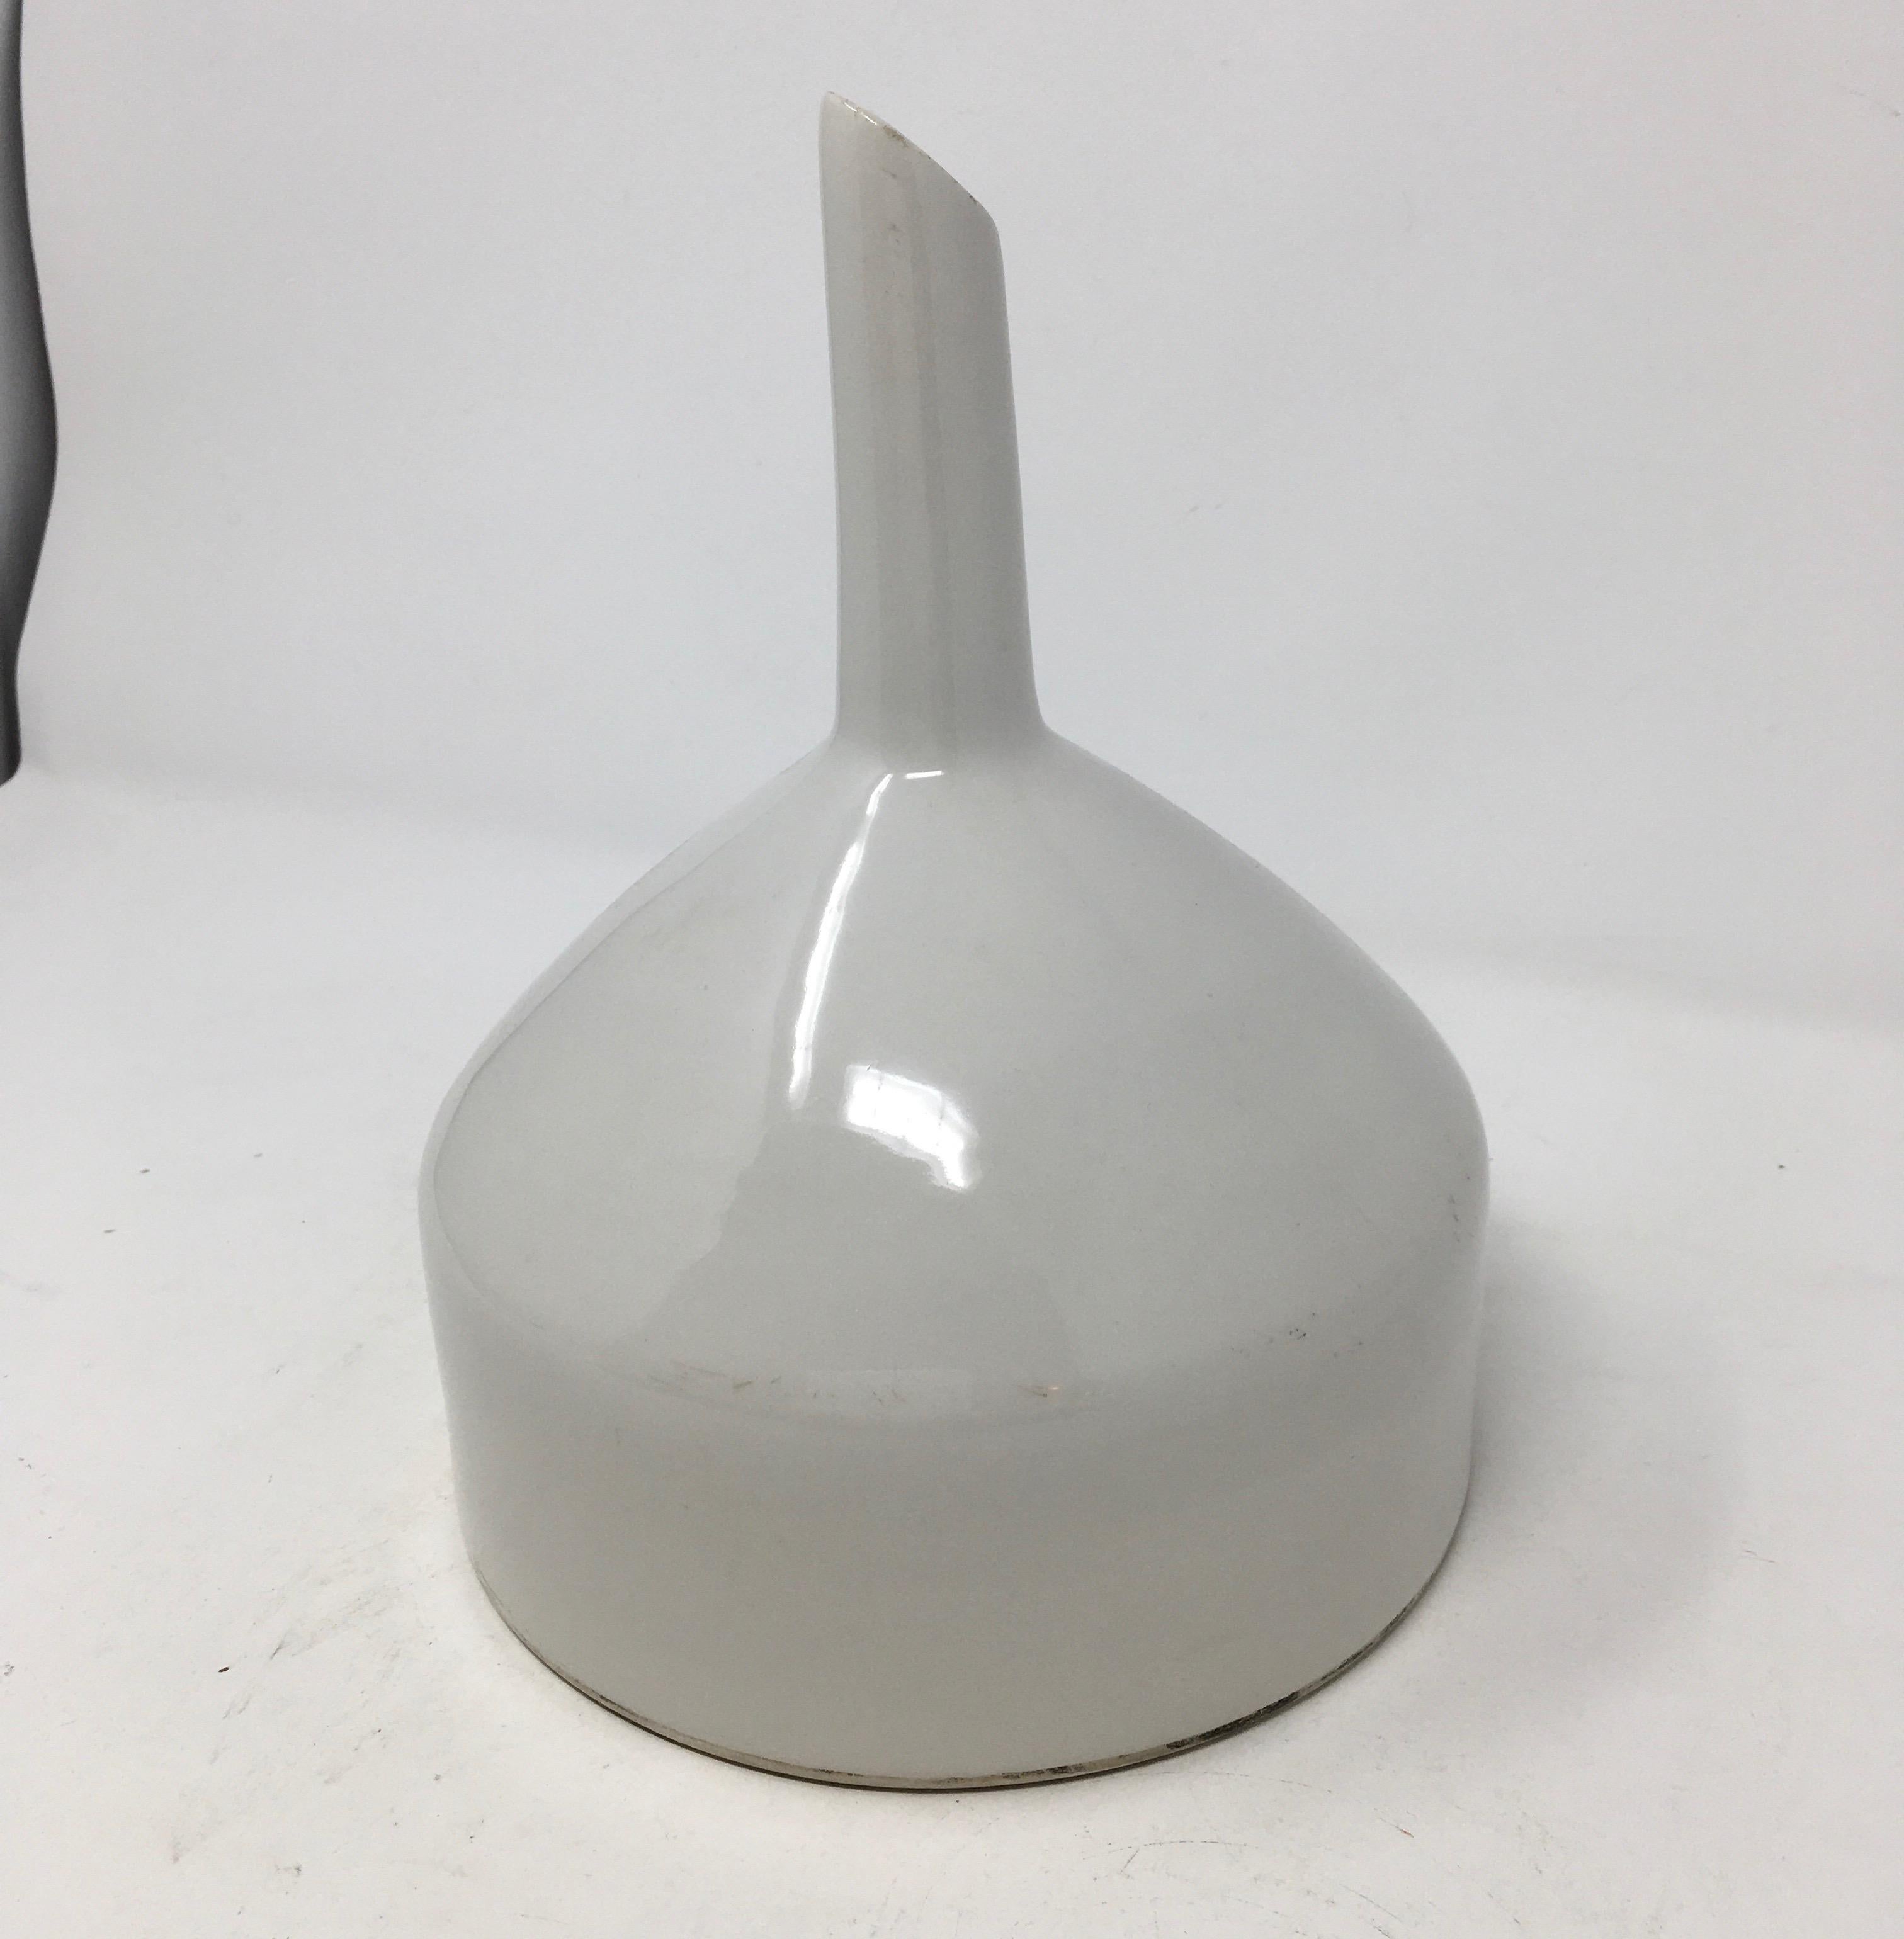 Found in France, this white ironstone or funnel marked G.D.V. was originally used in a pharmacy or laboratory. Made in the early 20th century. By Girault-Demay-Vignolet, the funnel/sieve was used for filtering while pouring into a bottle. The white